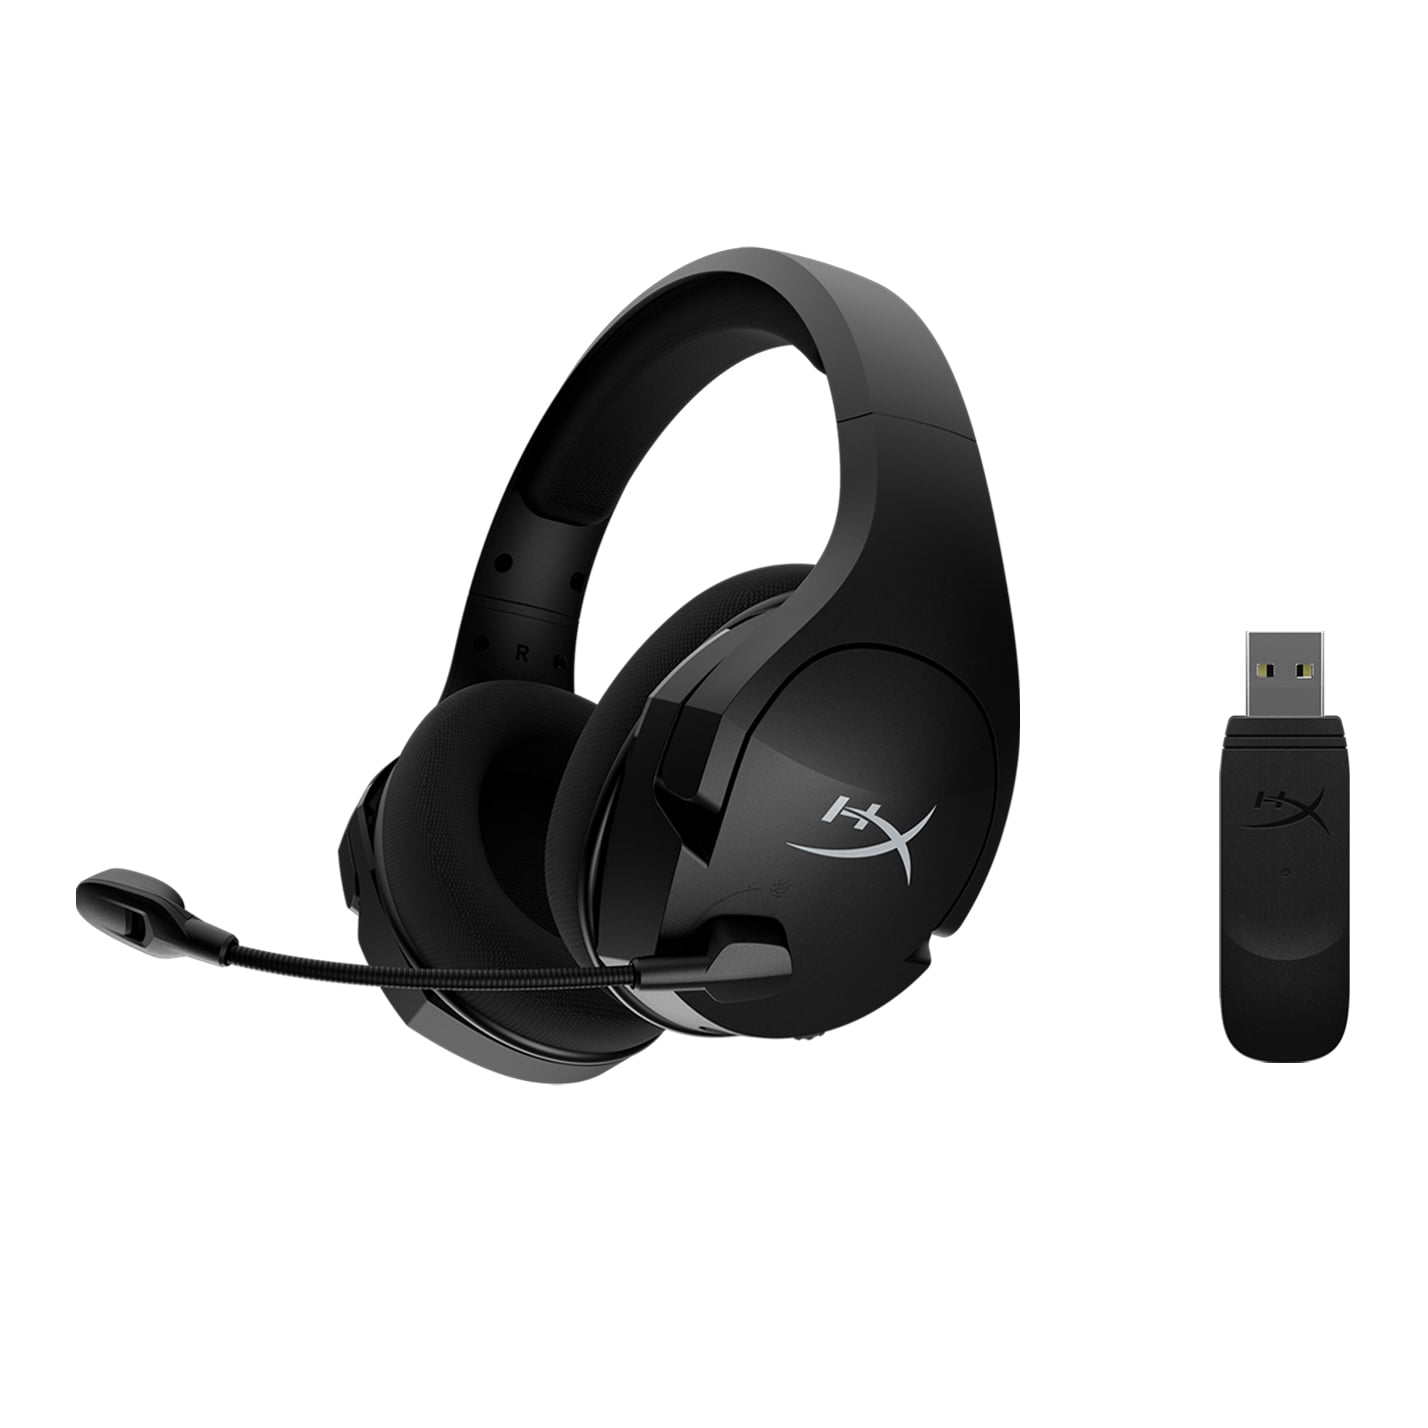 HyperX Cloud Stinger Core - Gaming Headset, for 7.1 Surround Sound, Noise Cancelling Microphone, Lightweight -